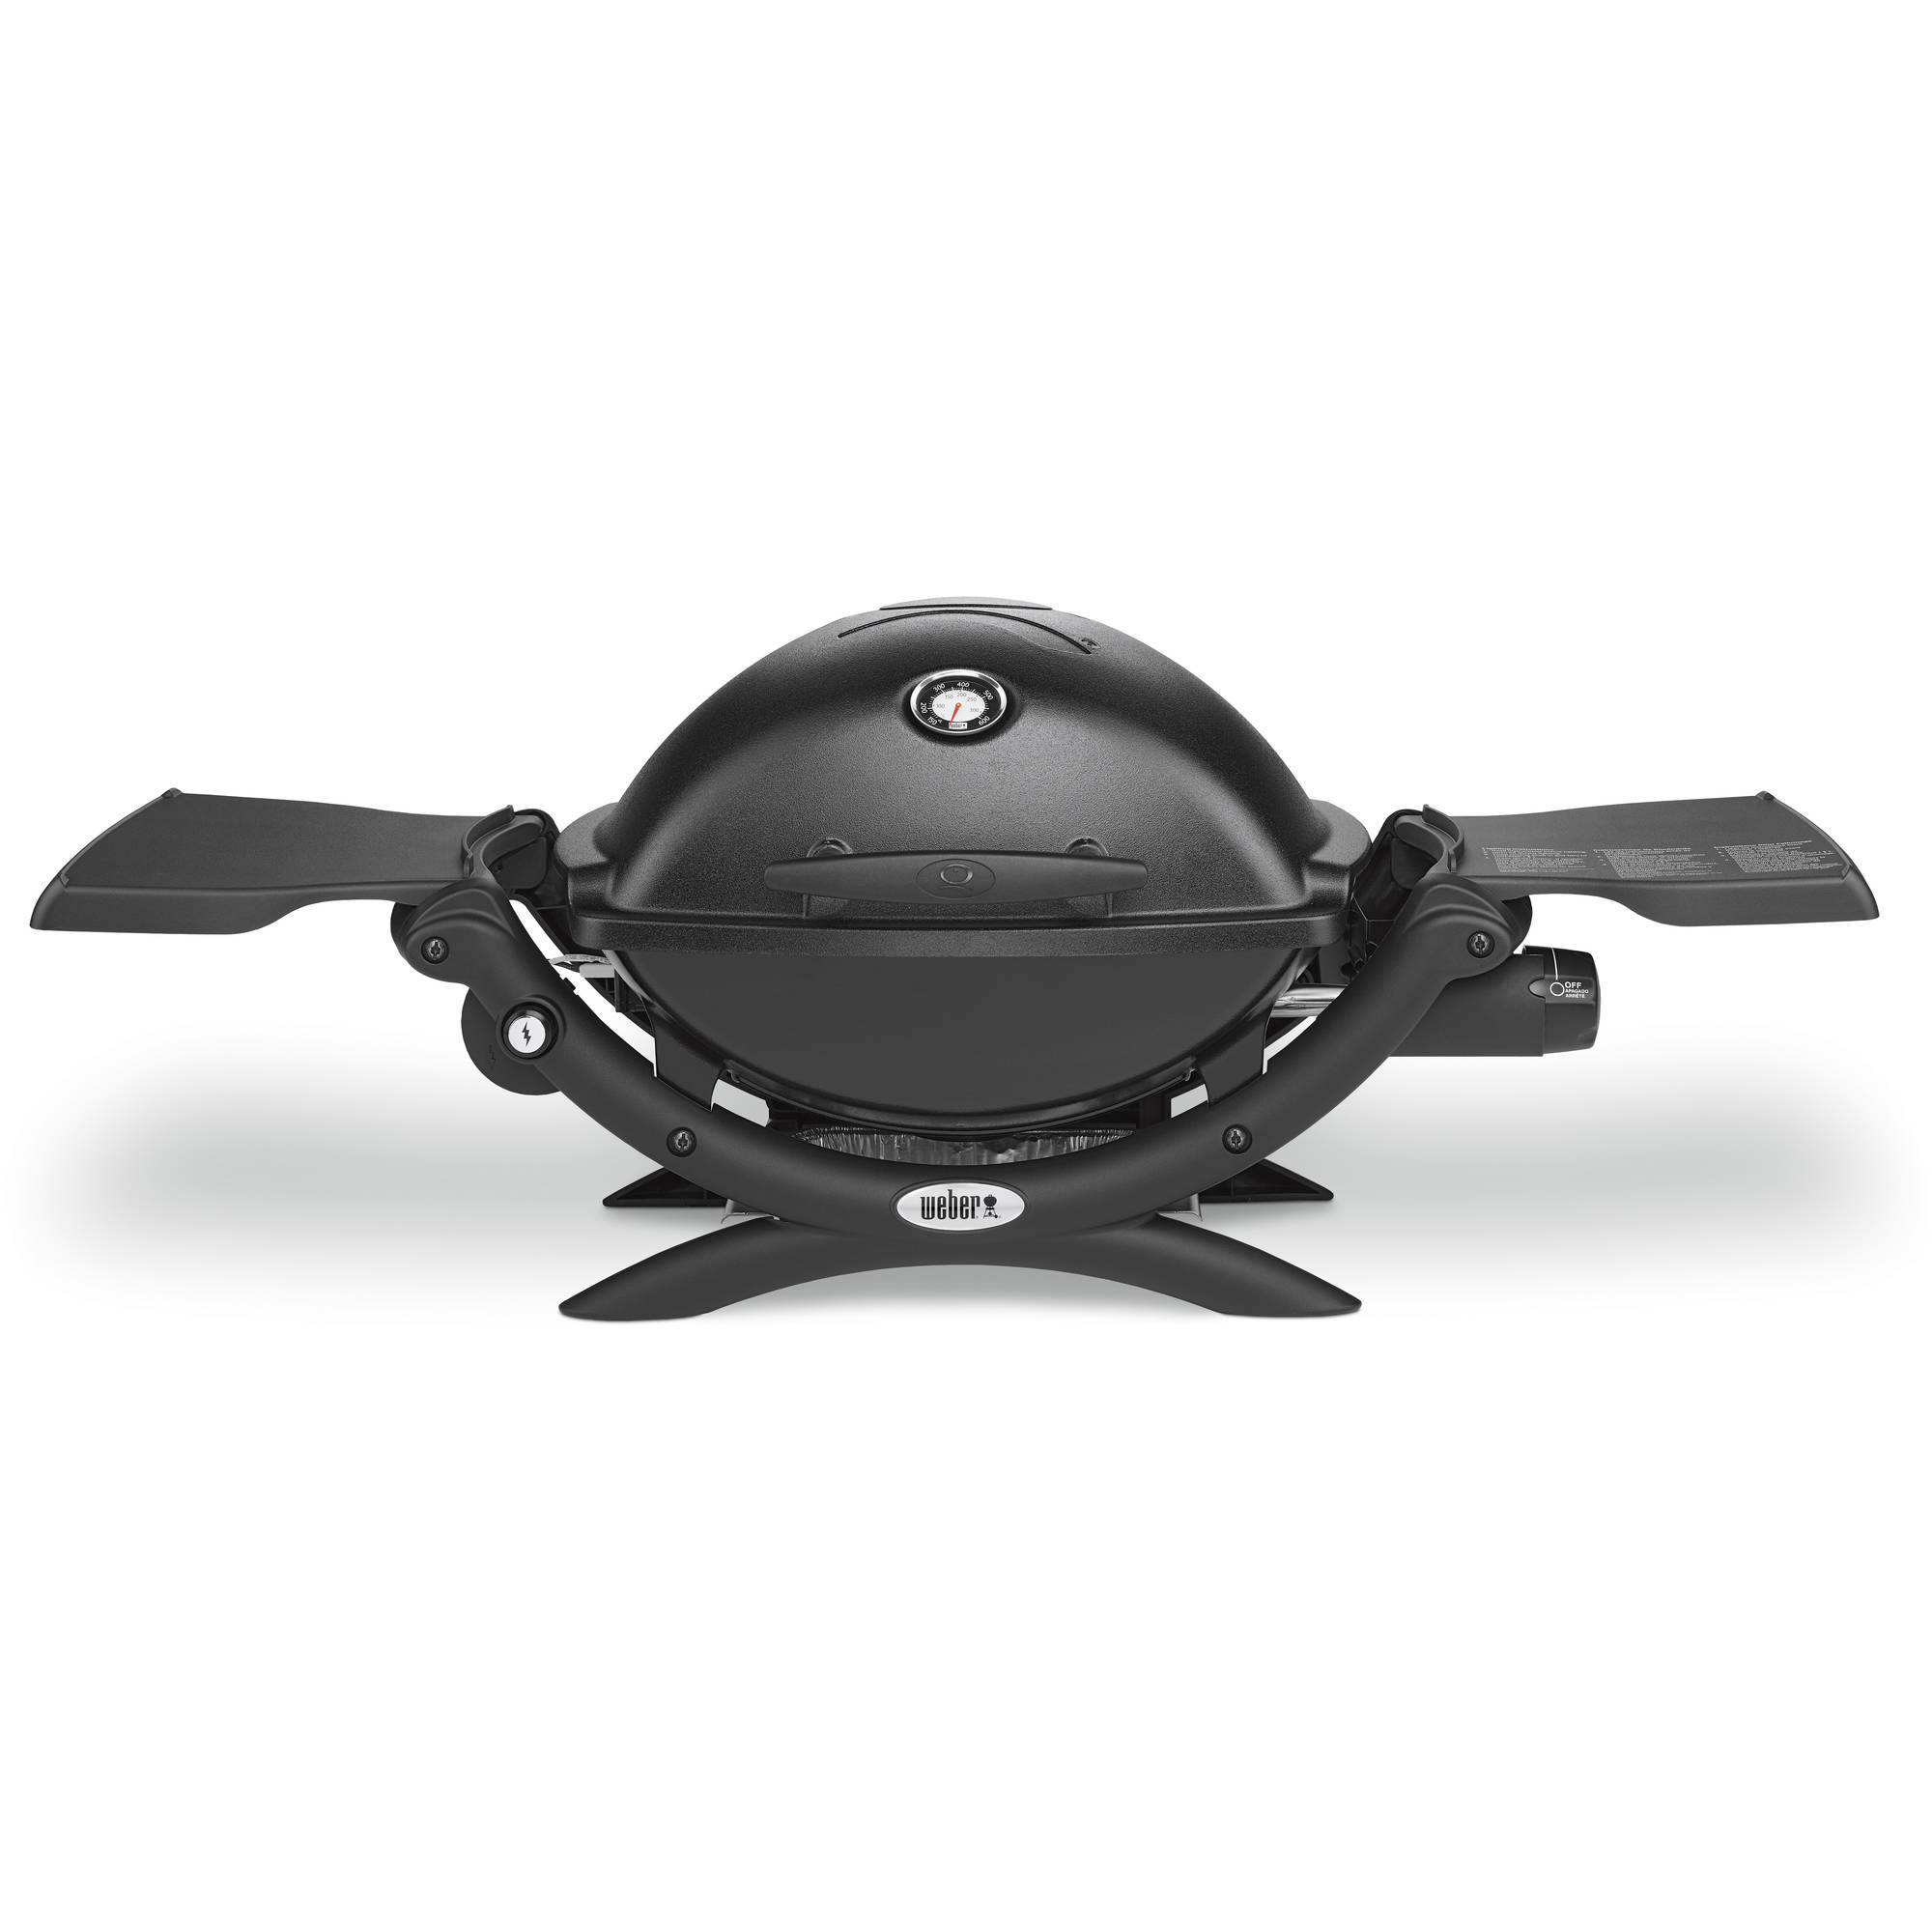 Weber Q 1200 Portable Gas Grill, Black - image 4 of 8